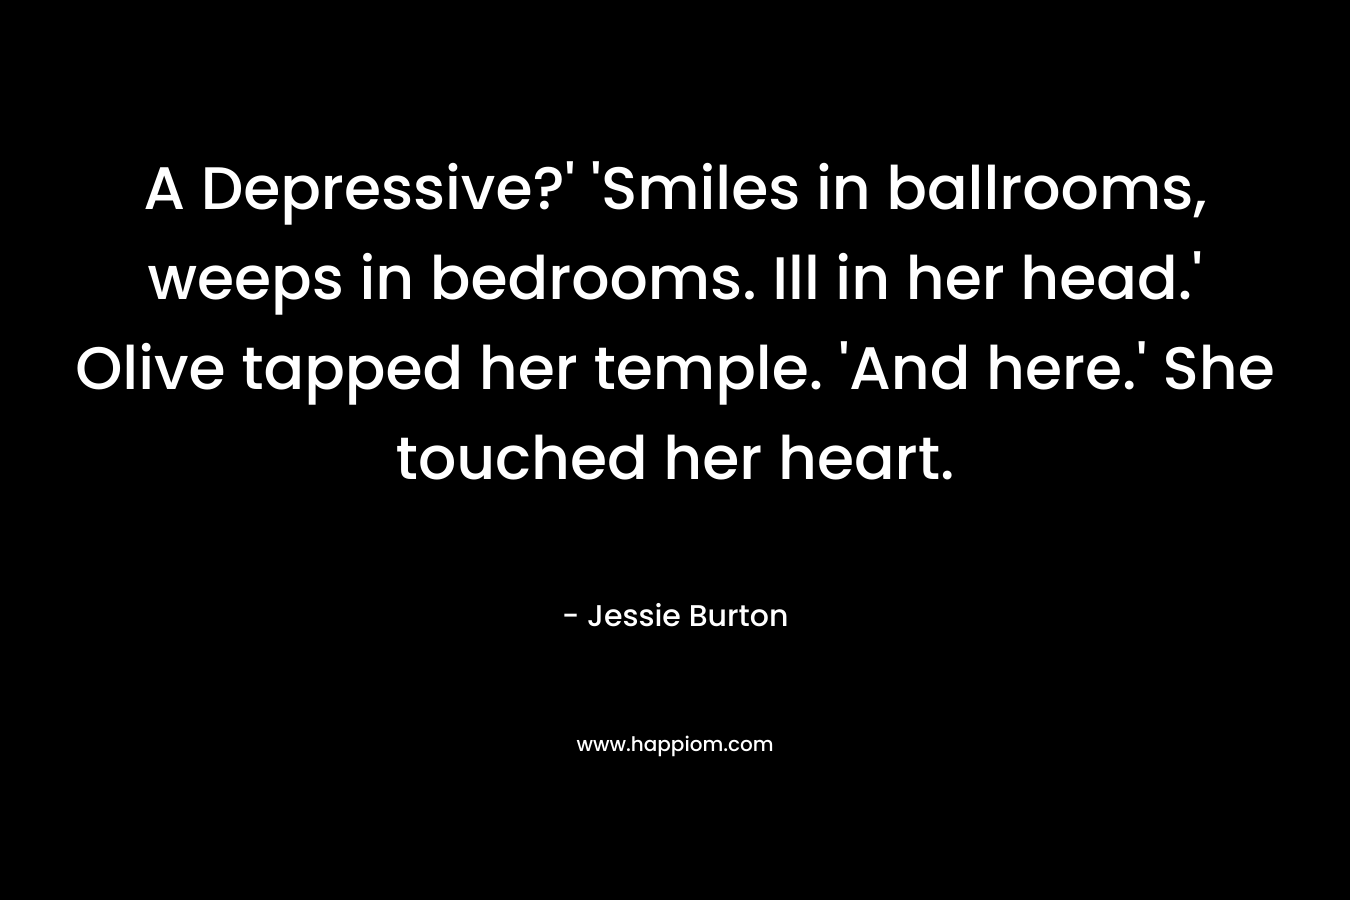 A Depressive?’ ‘Smiles in ballrooms, weeps in bedrooms. Ill in her head.’ Olive tapped her temple. ‘And here.’ She touched her heart. – Jessie Burton